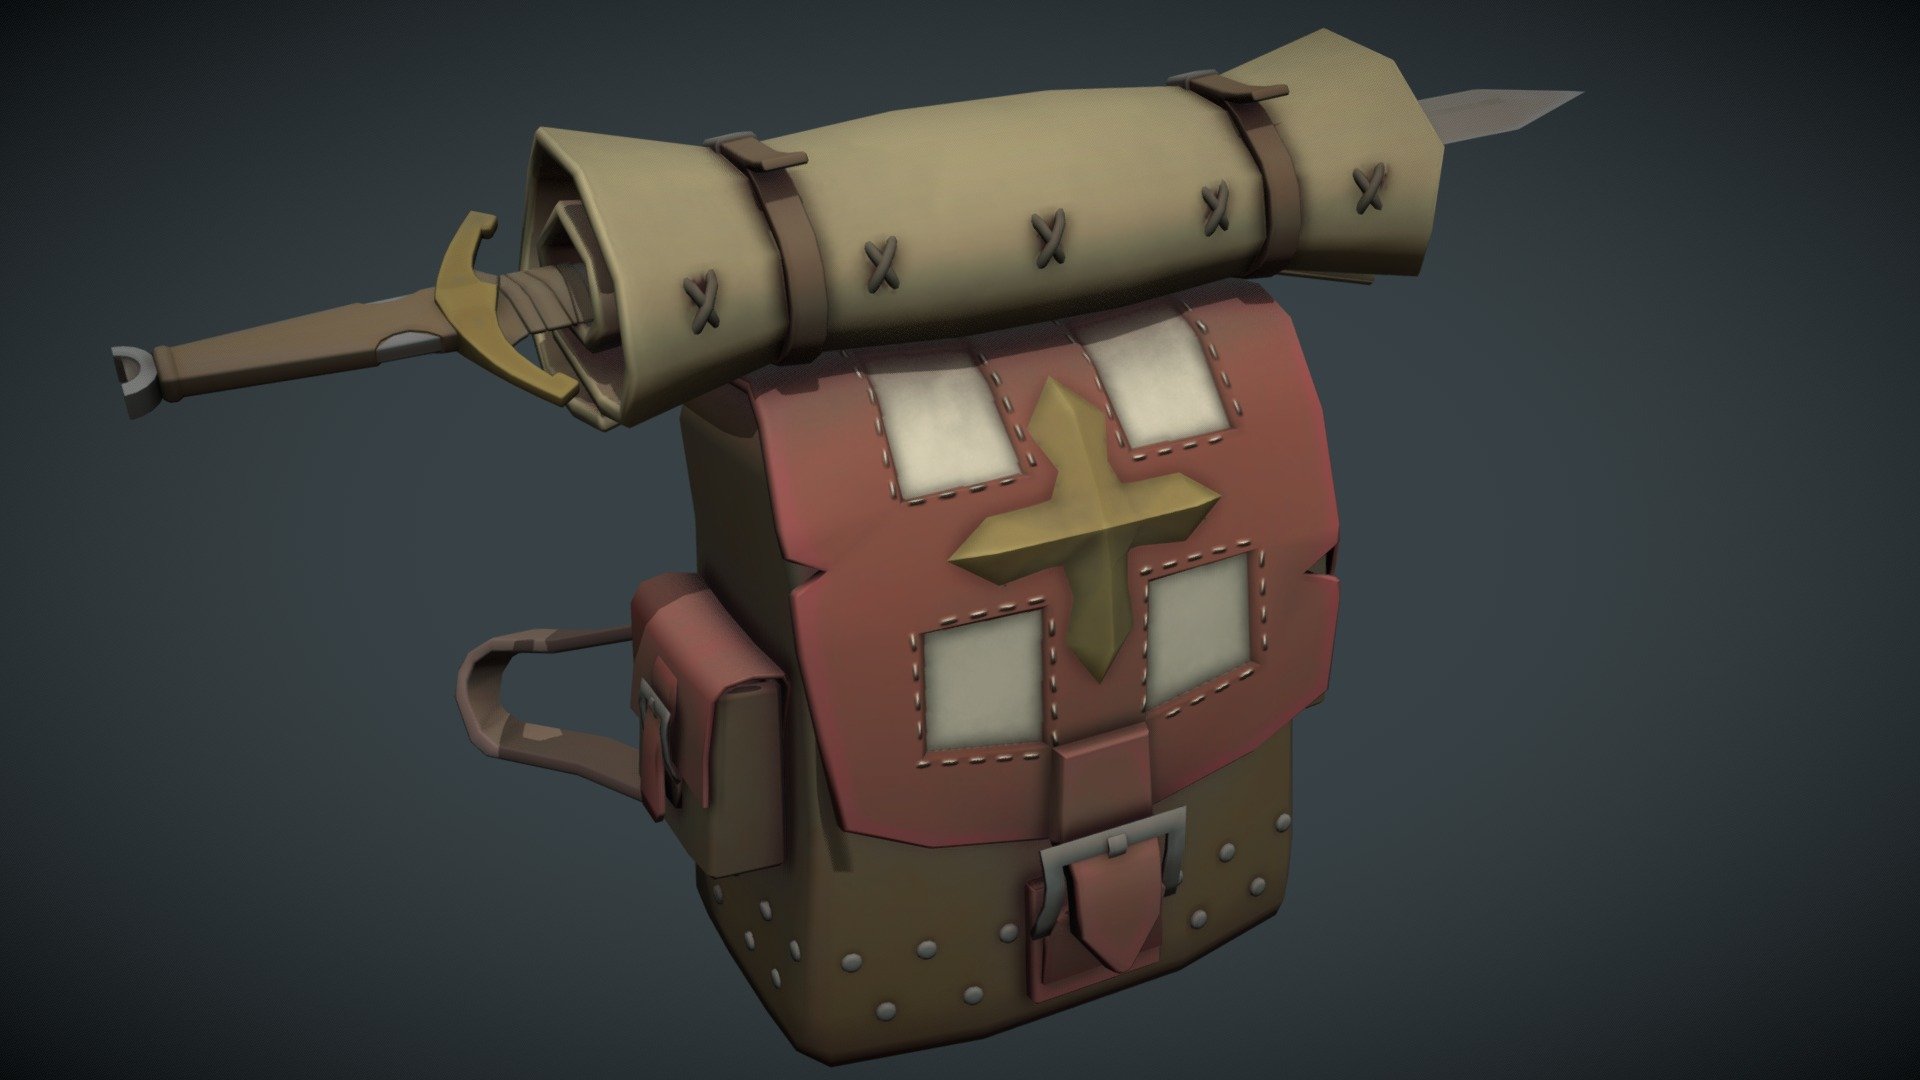 Made this bag in some spare time of mine. (check the back of it) - Adventurers Backpack - 3D model by Lloyd Clasby (@Tawnytrash) 3d model